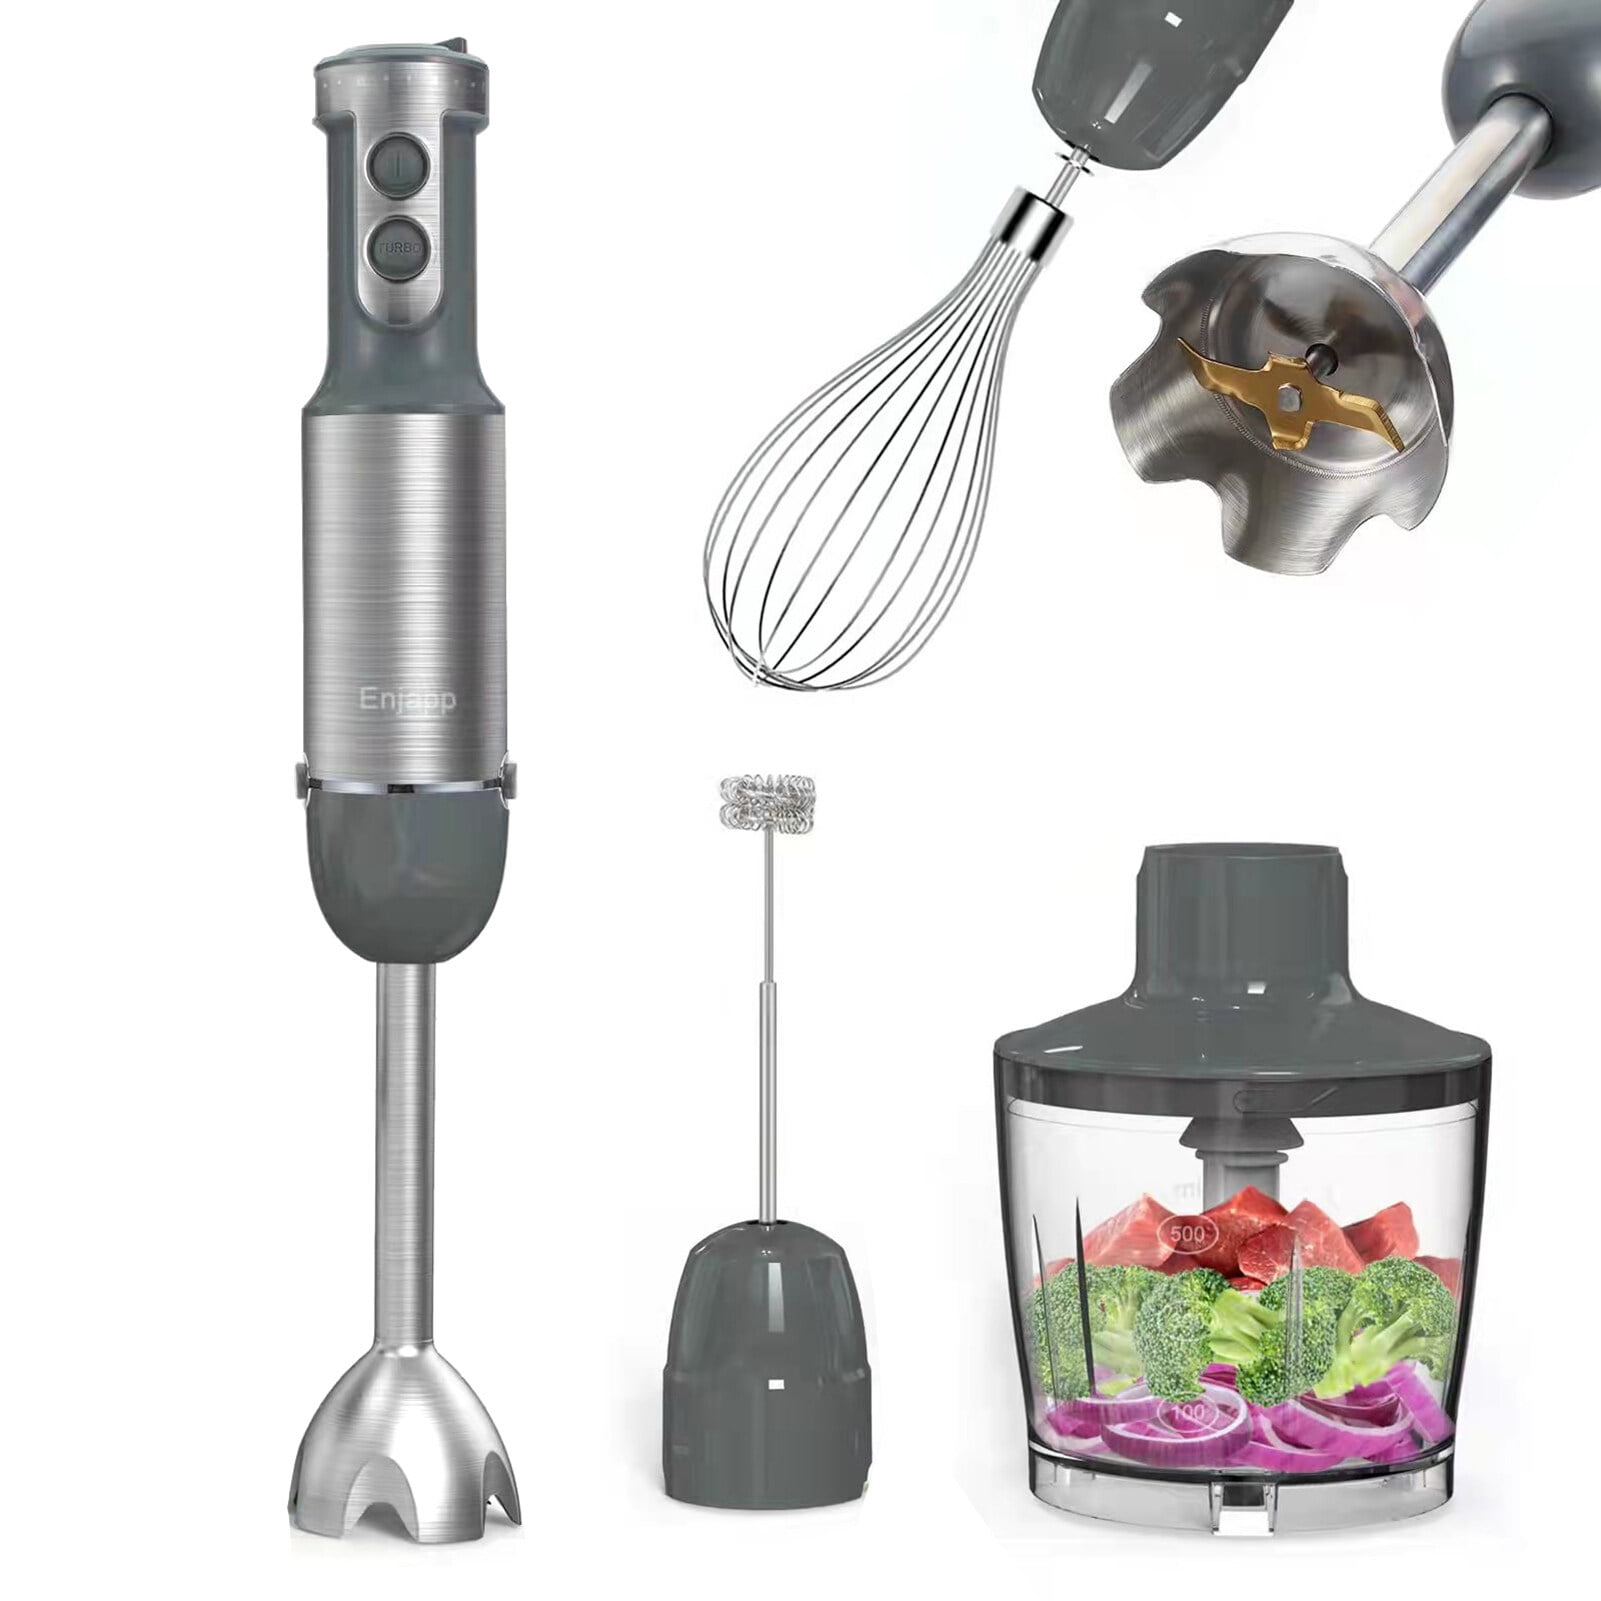 Immersion Hand Blender 5 in 1: 1100W Electric Blender Handheld Stick Mixer  with Trigger Control Grip, Emulsion Blenders for Kitchen Soup, Mayo,  Smoothie and Baby Food with Chopper, Whisk and Frother: Home & Kitchen 